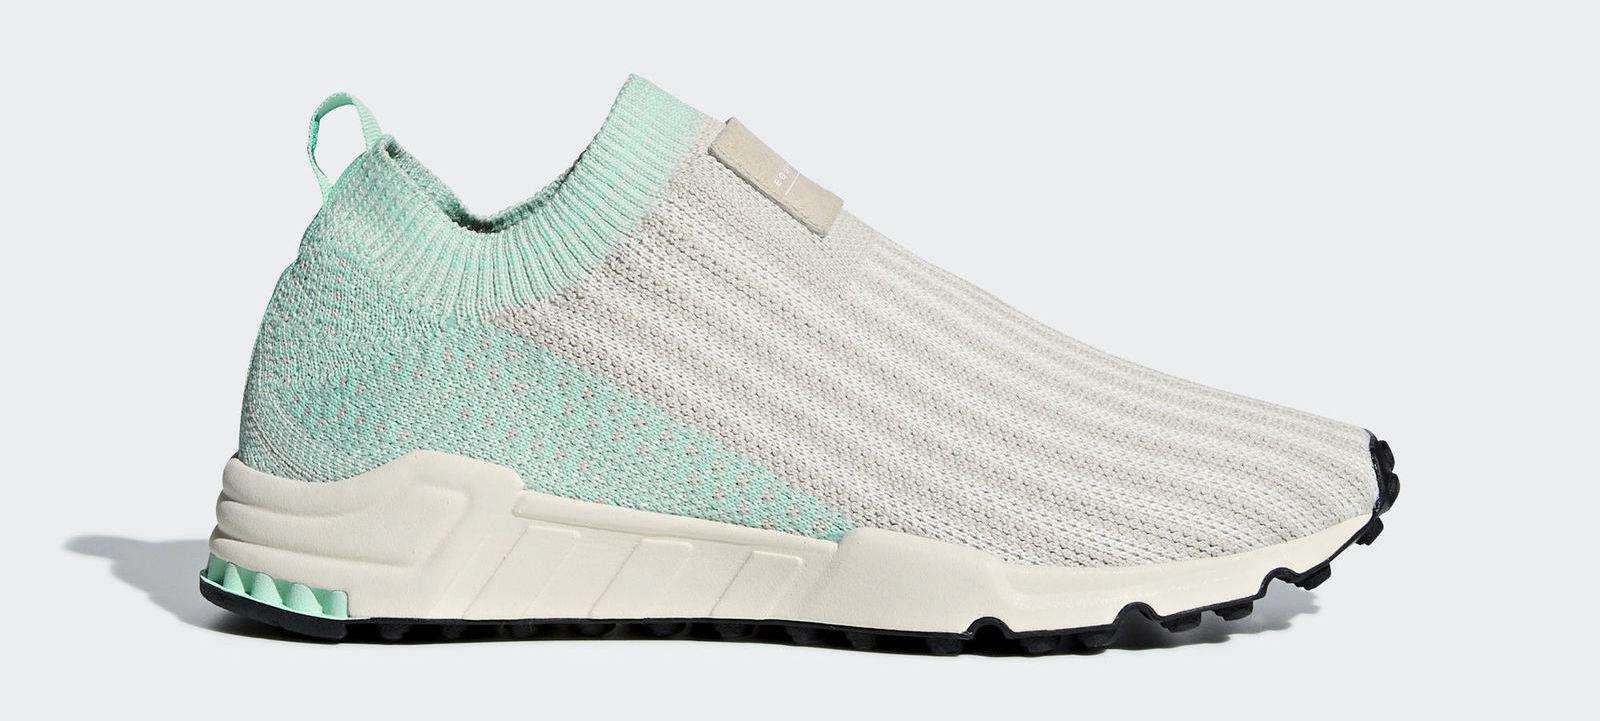 What about these Originals women EQT support sock Primeknit shoes as a Christmas present?